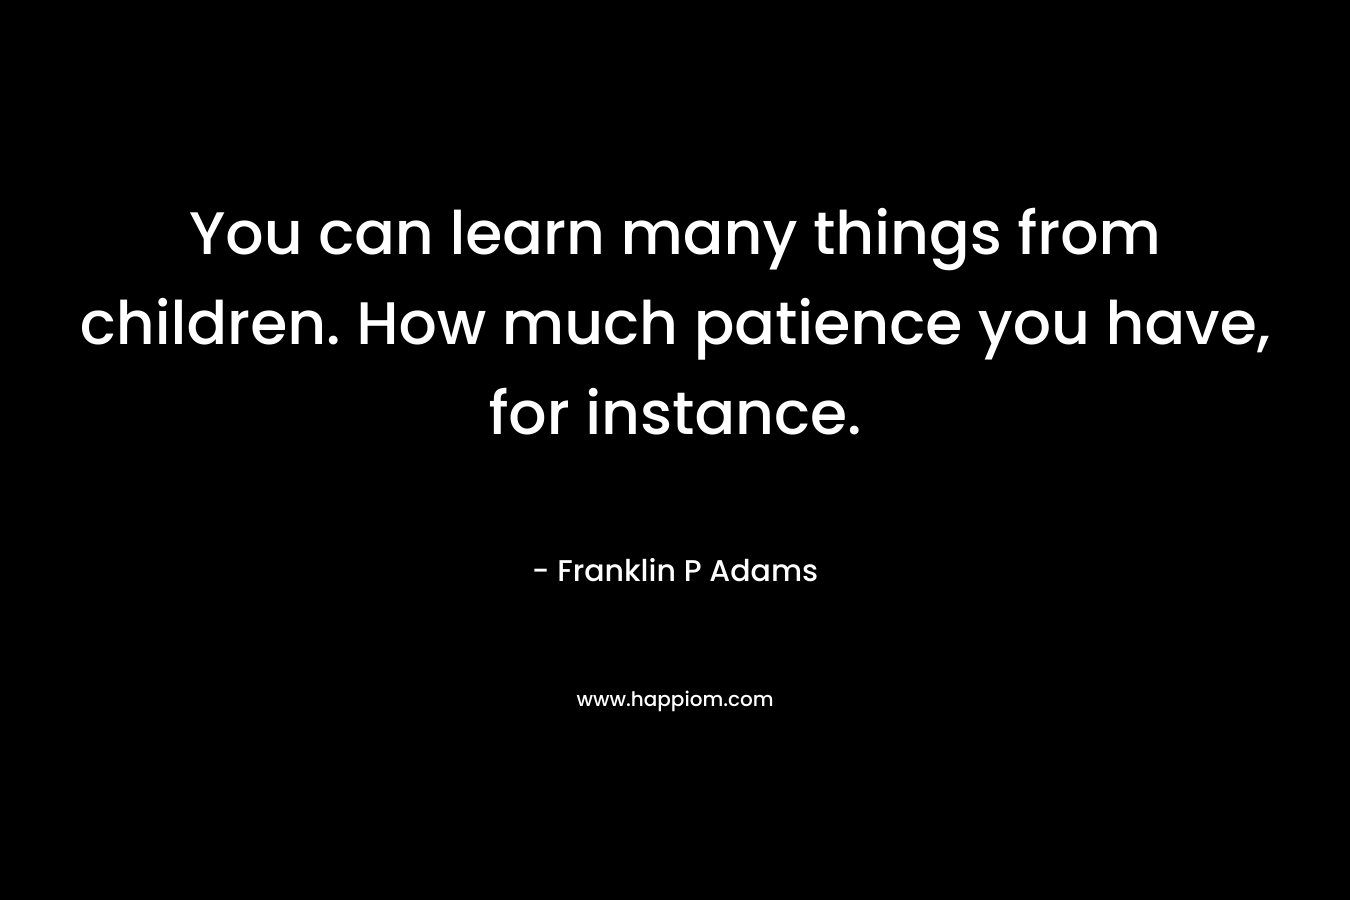 You can learn many things from children. How much patience you have, for instance. – Franklin P Adams